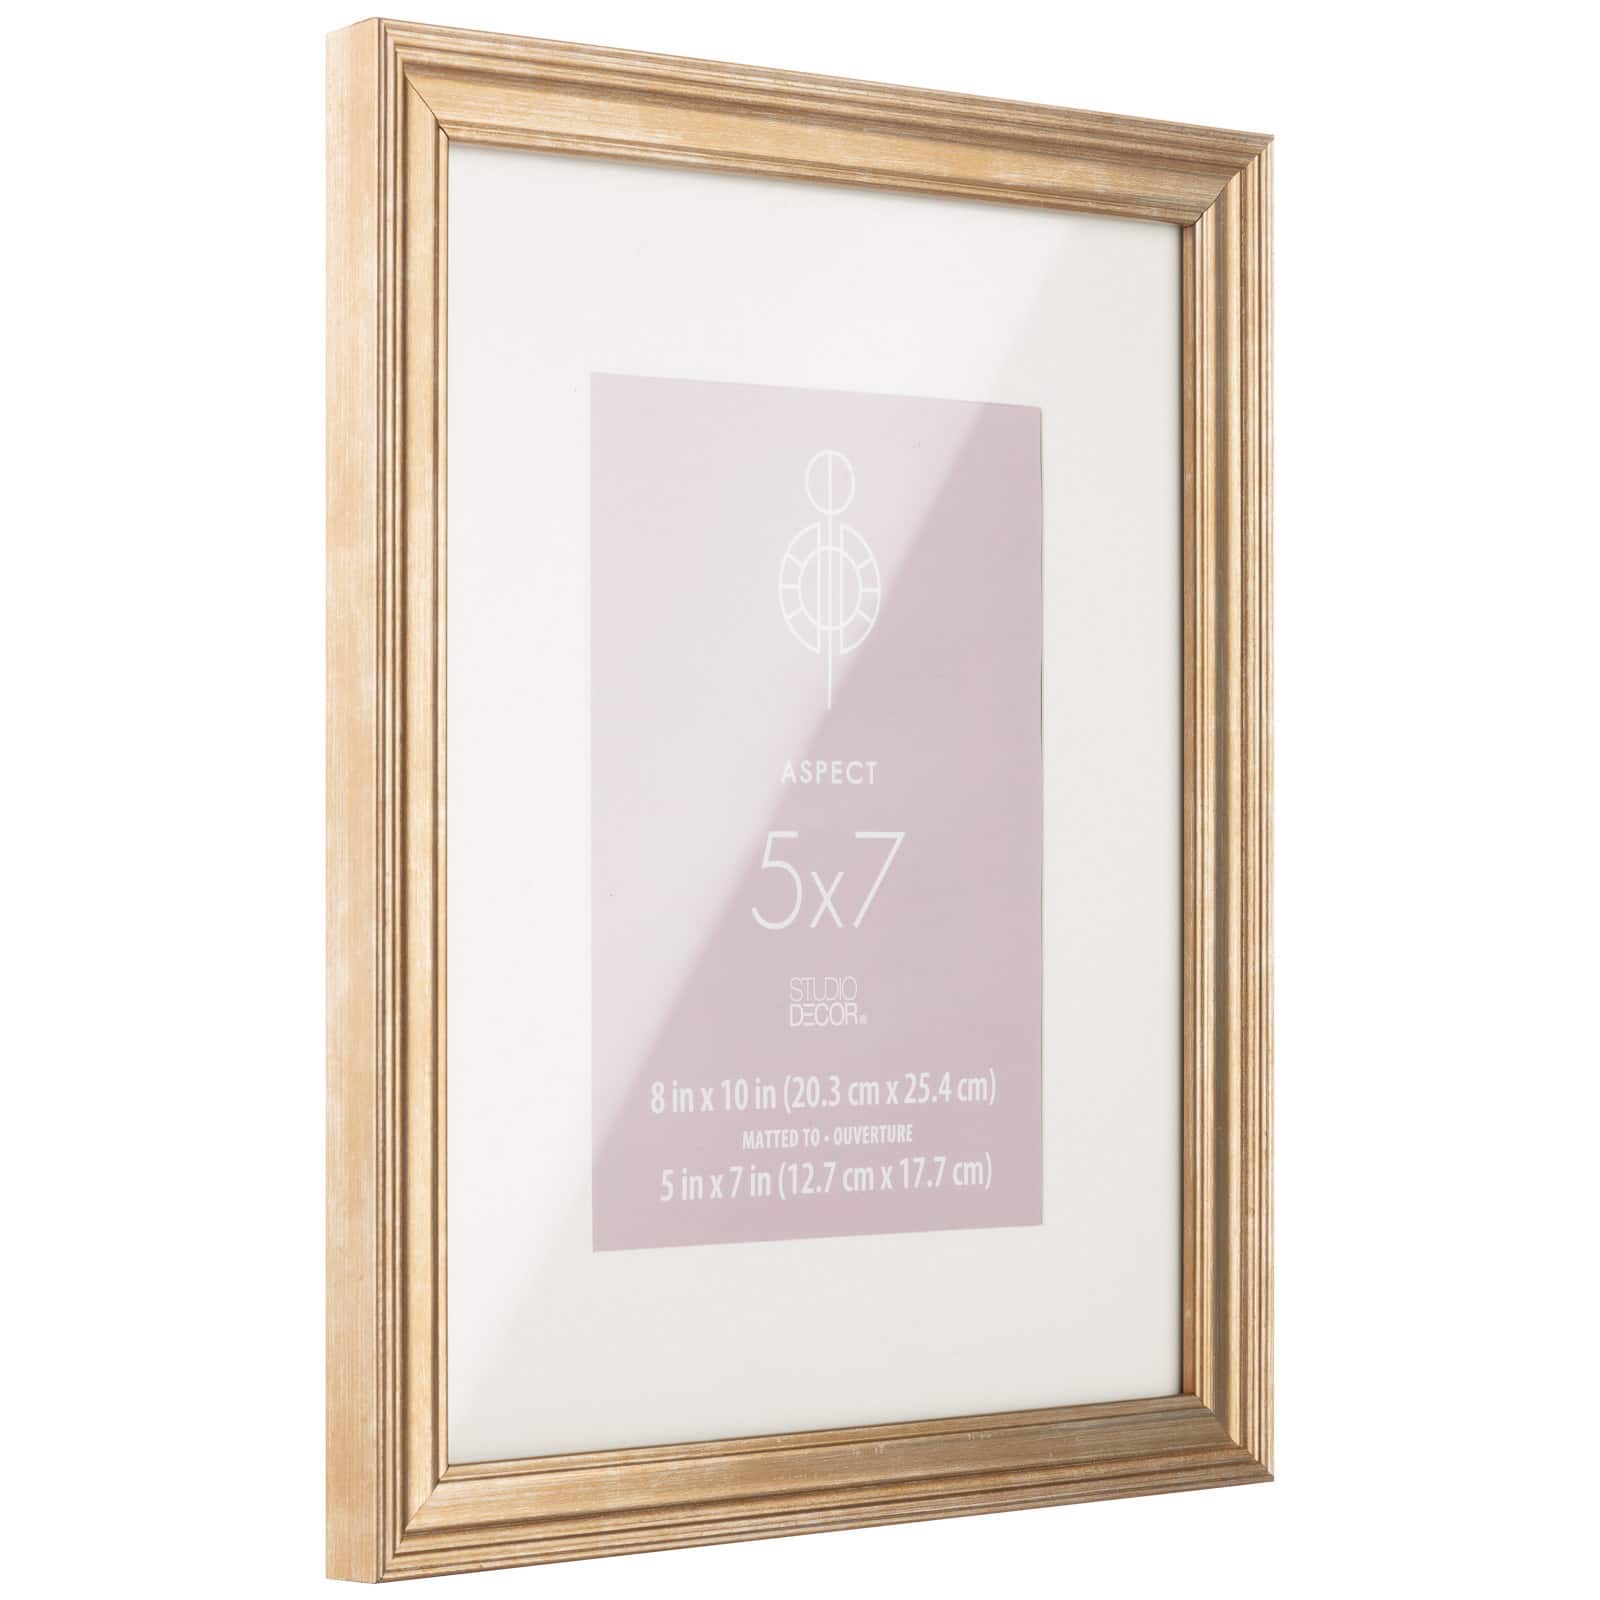 12 Pack: Gold Narrow 5&#x22; x 7&#x22; with Mat Frame, Aspect by Studio D&#xE9;cor&#xAE;